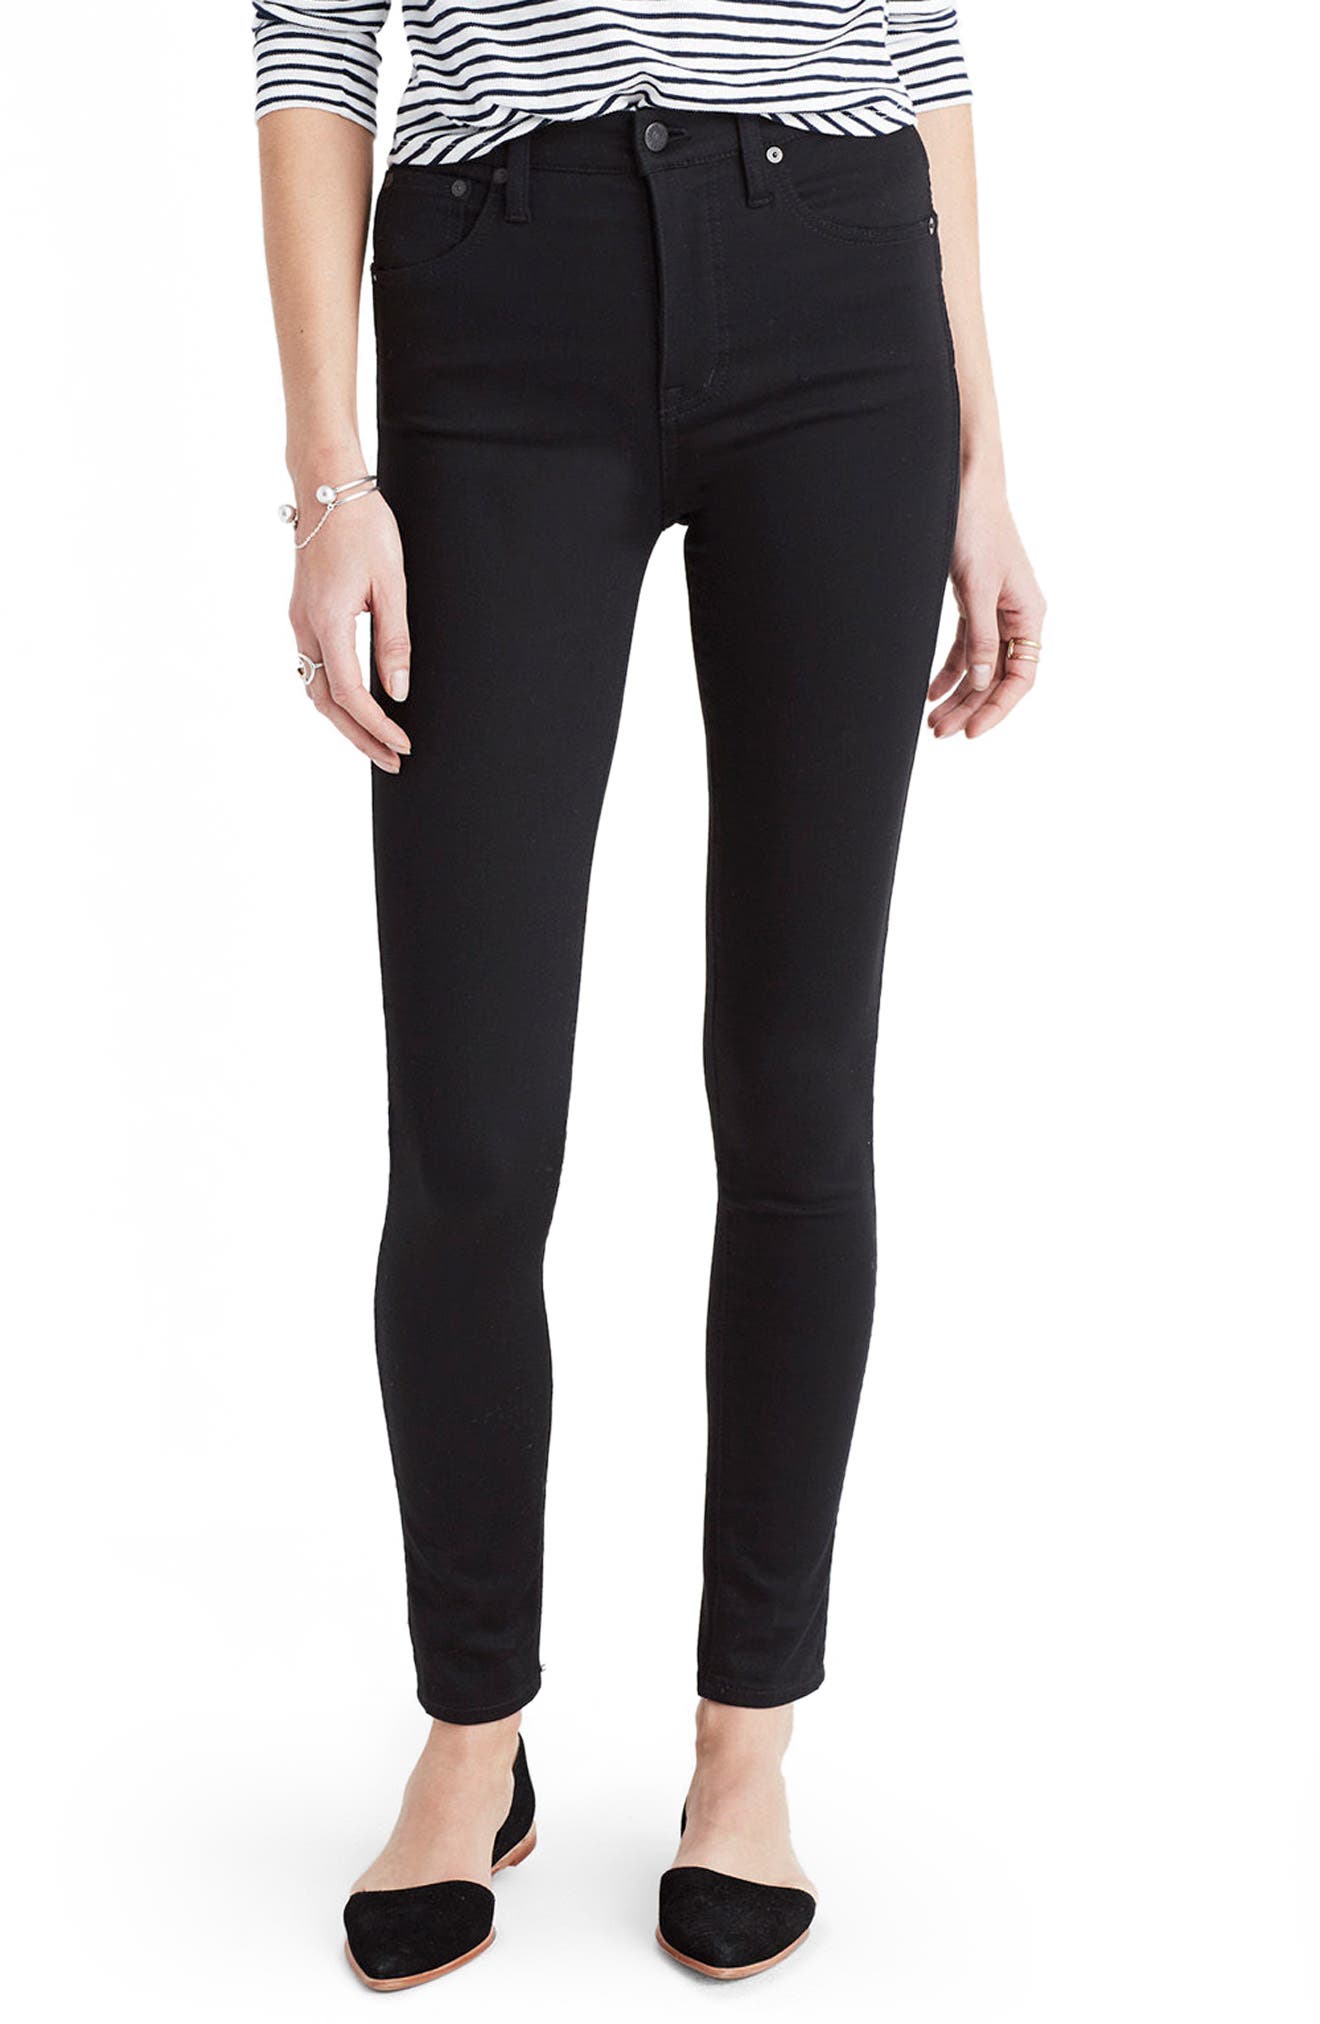 Plus Women's Madewell 10-Inch High Rise Skinny Jeans